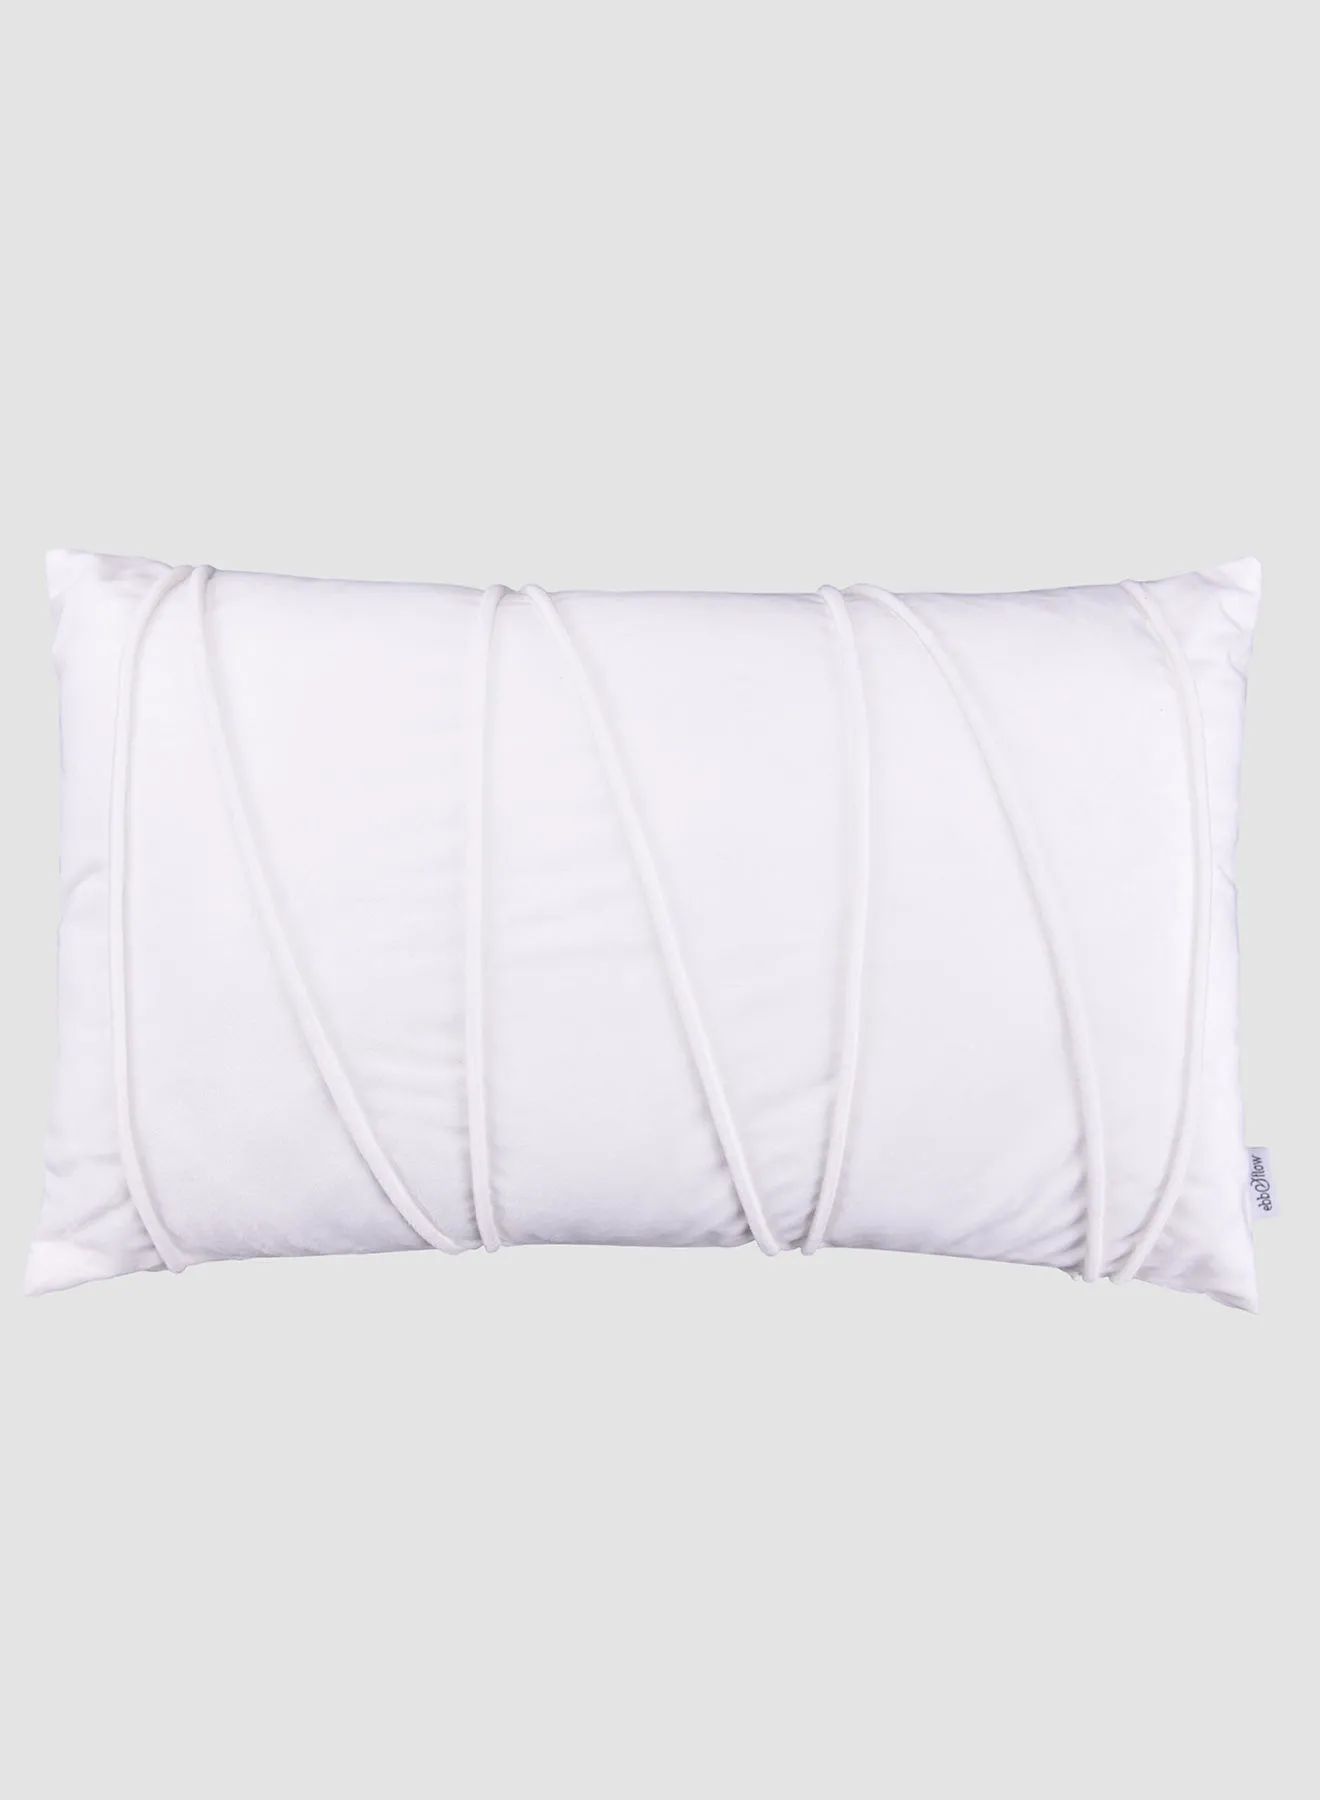 ebb & flow 3D Velvet Cushion  II,Unique Luxury Quality Decor Items for the Perfect Stylish Home Off White 30 x 50cm